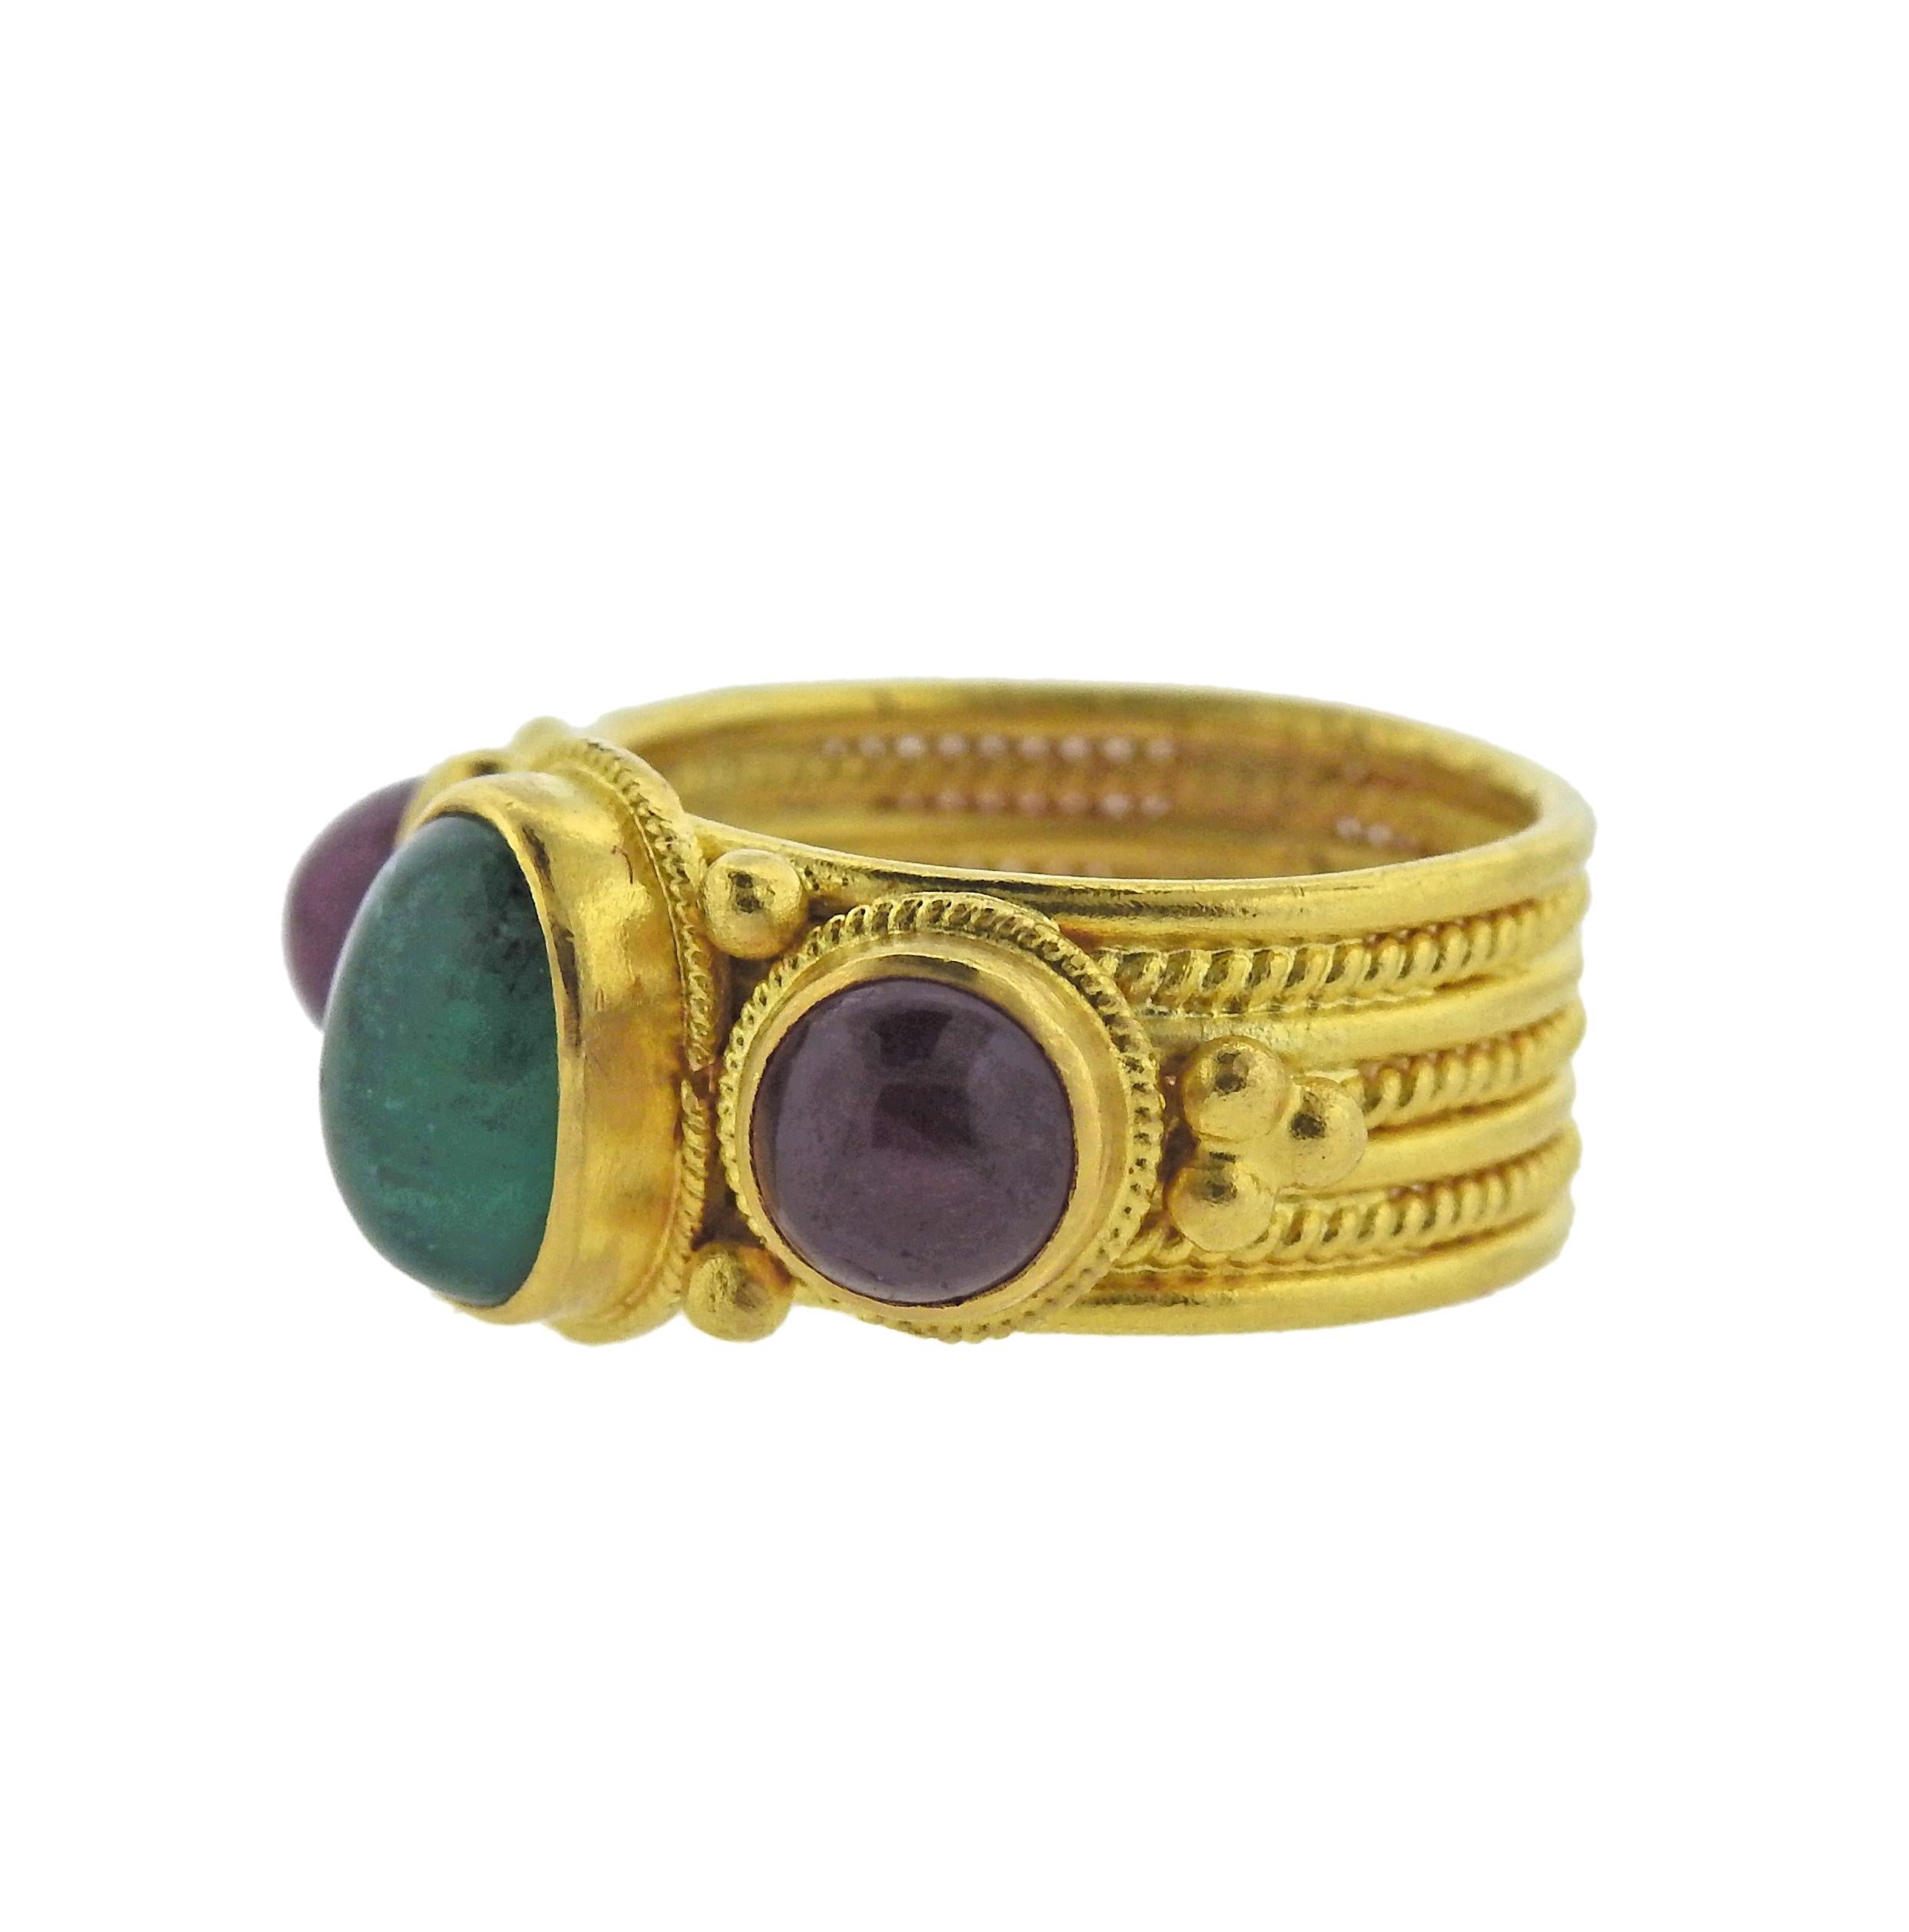 18k yellow gold cuff band ring, crafted by Greek designer Ilias Lalaounis, set with ruby and emerald cabochons. Ring size - 5.5, ring top is 11mm wide, weighs 10.7 grams. Marked: A.8, 750, Greece, Maker's hallmark.